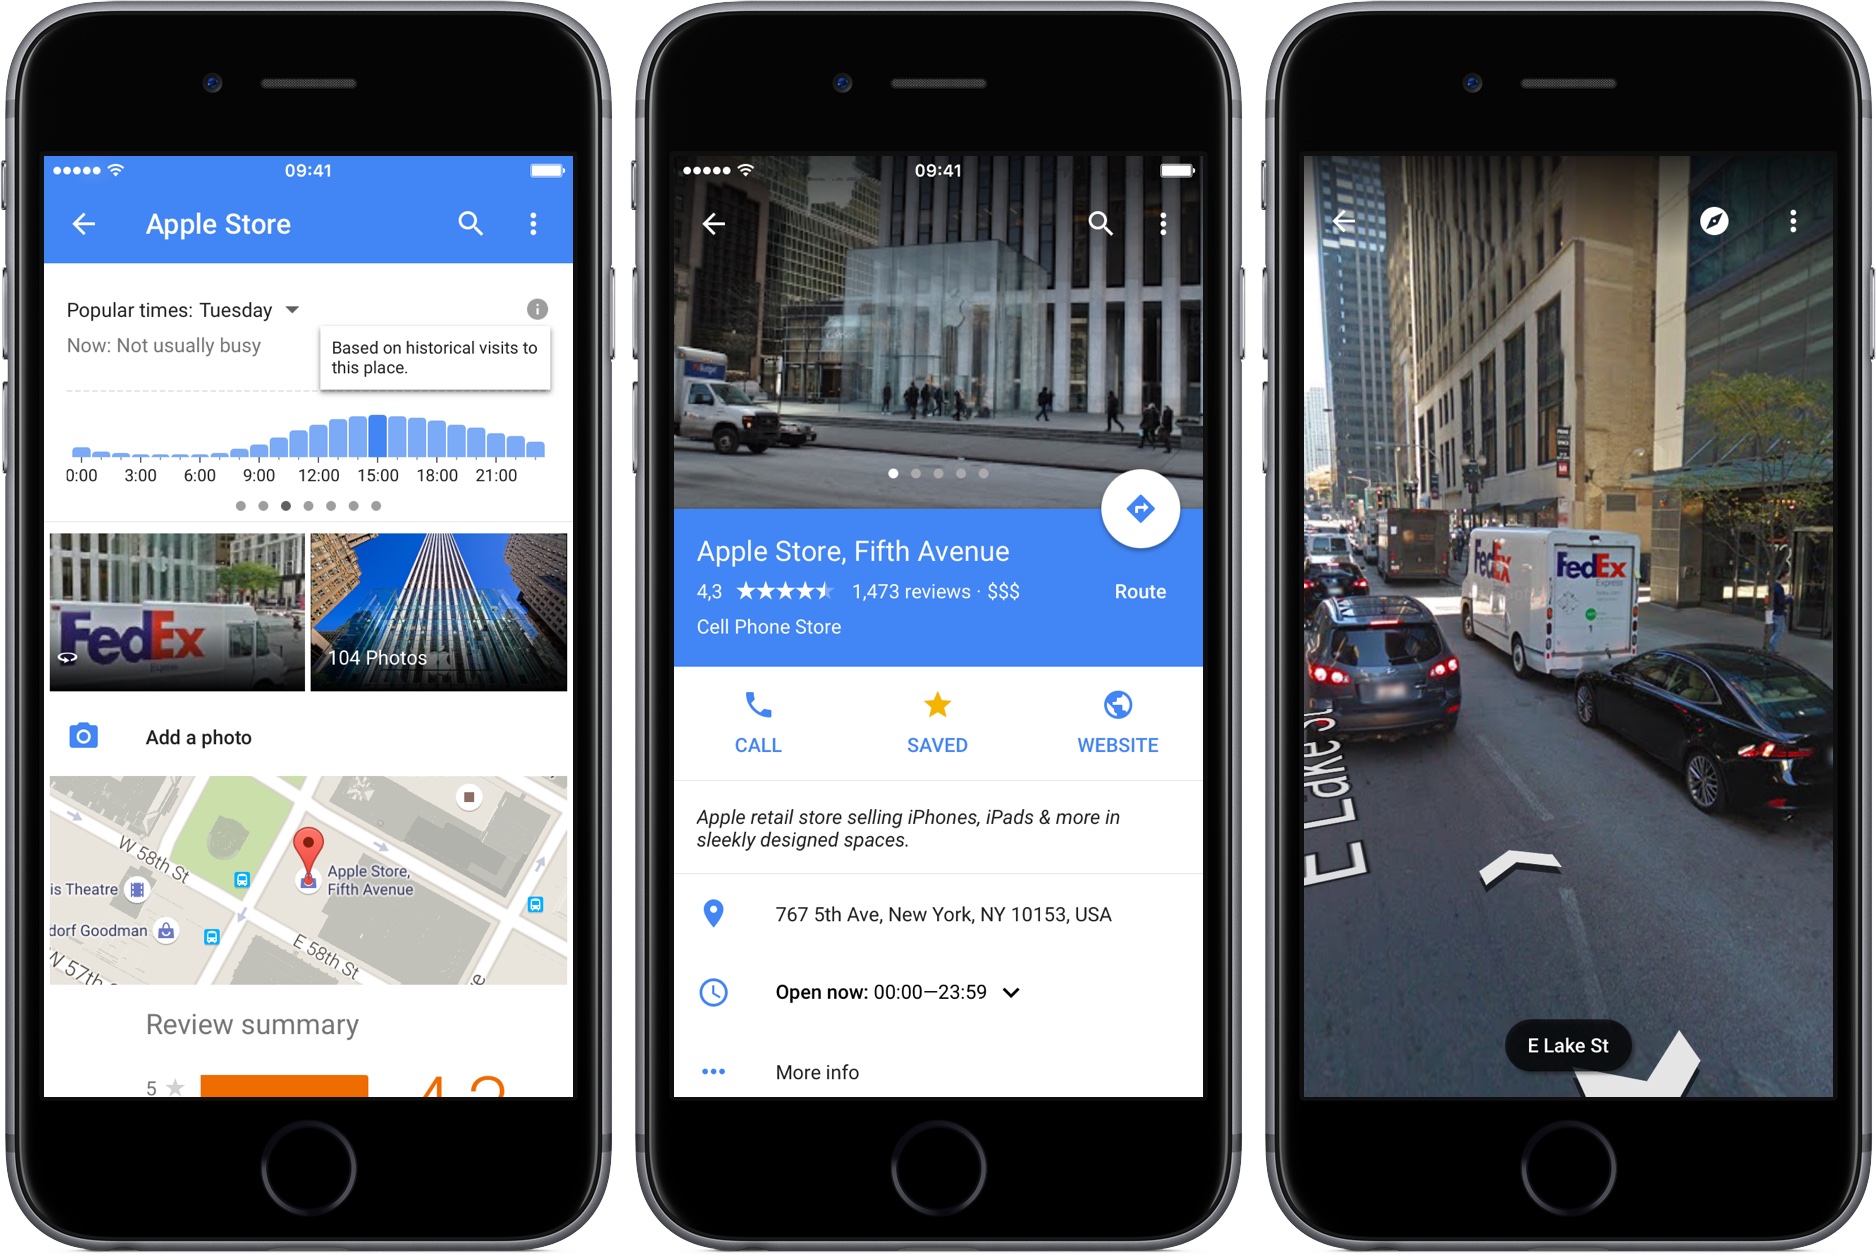 Google Maps gains new voice controls in navigation, Street